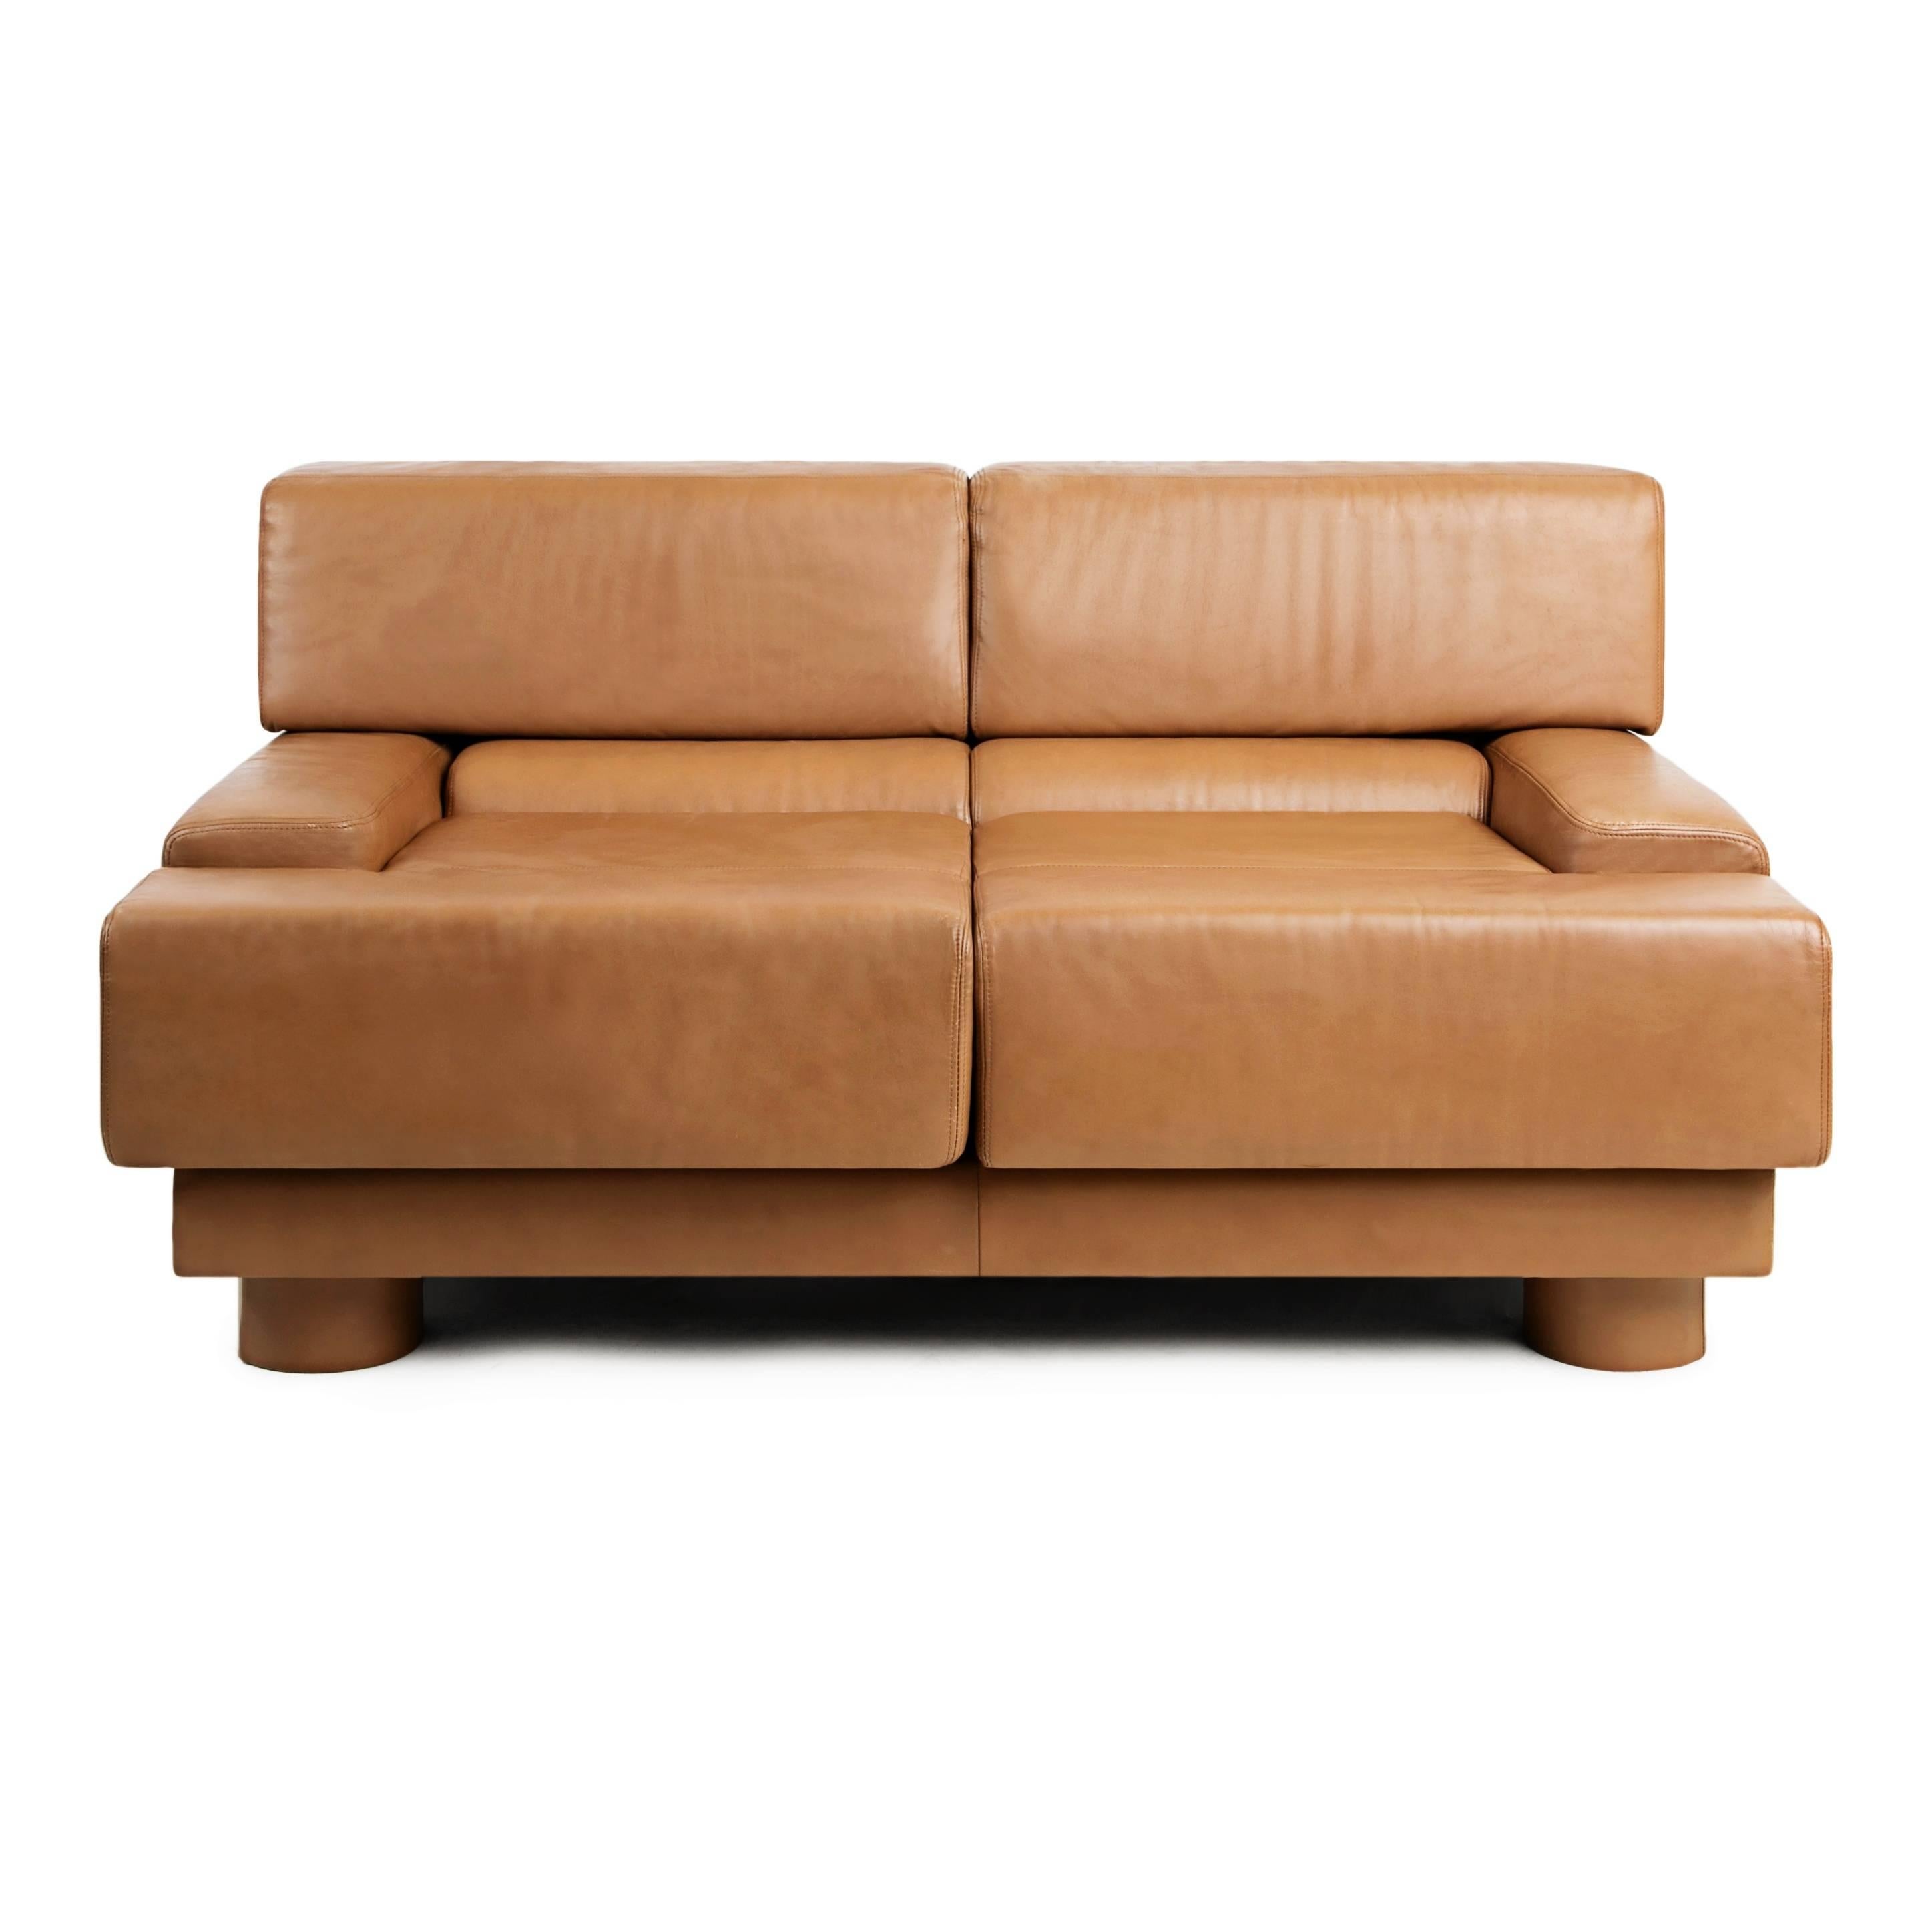 An impressive pair of tan leather loveseats by Brazilian designer Percival Lafer, both retain original labels underneath. These sizable sofas provide a deep comfortable seat, with a broad backrest and low flat arms - perfect for balancing a drink